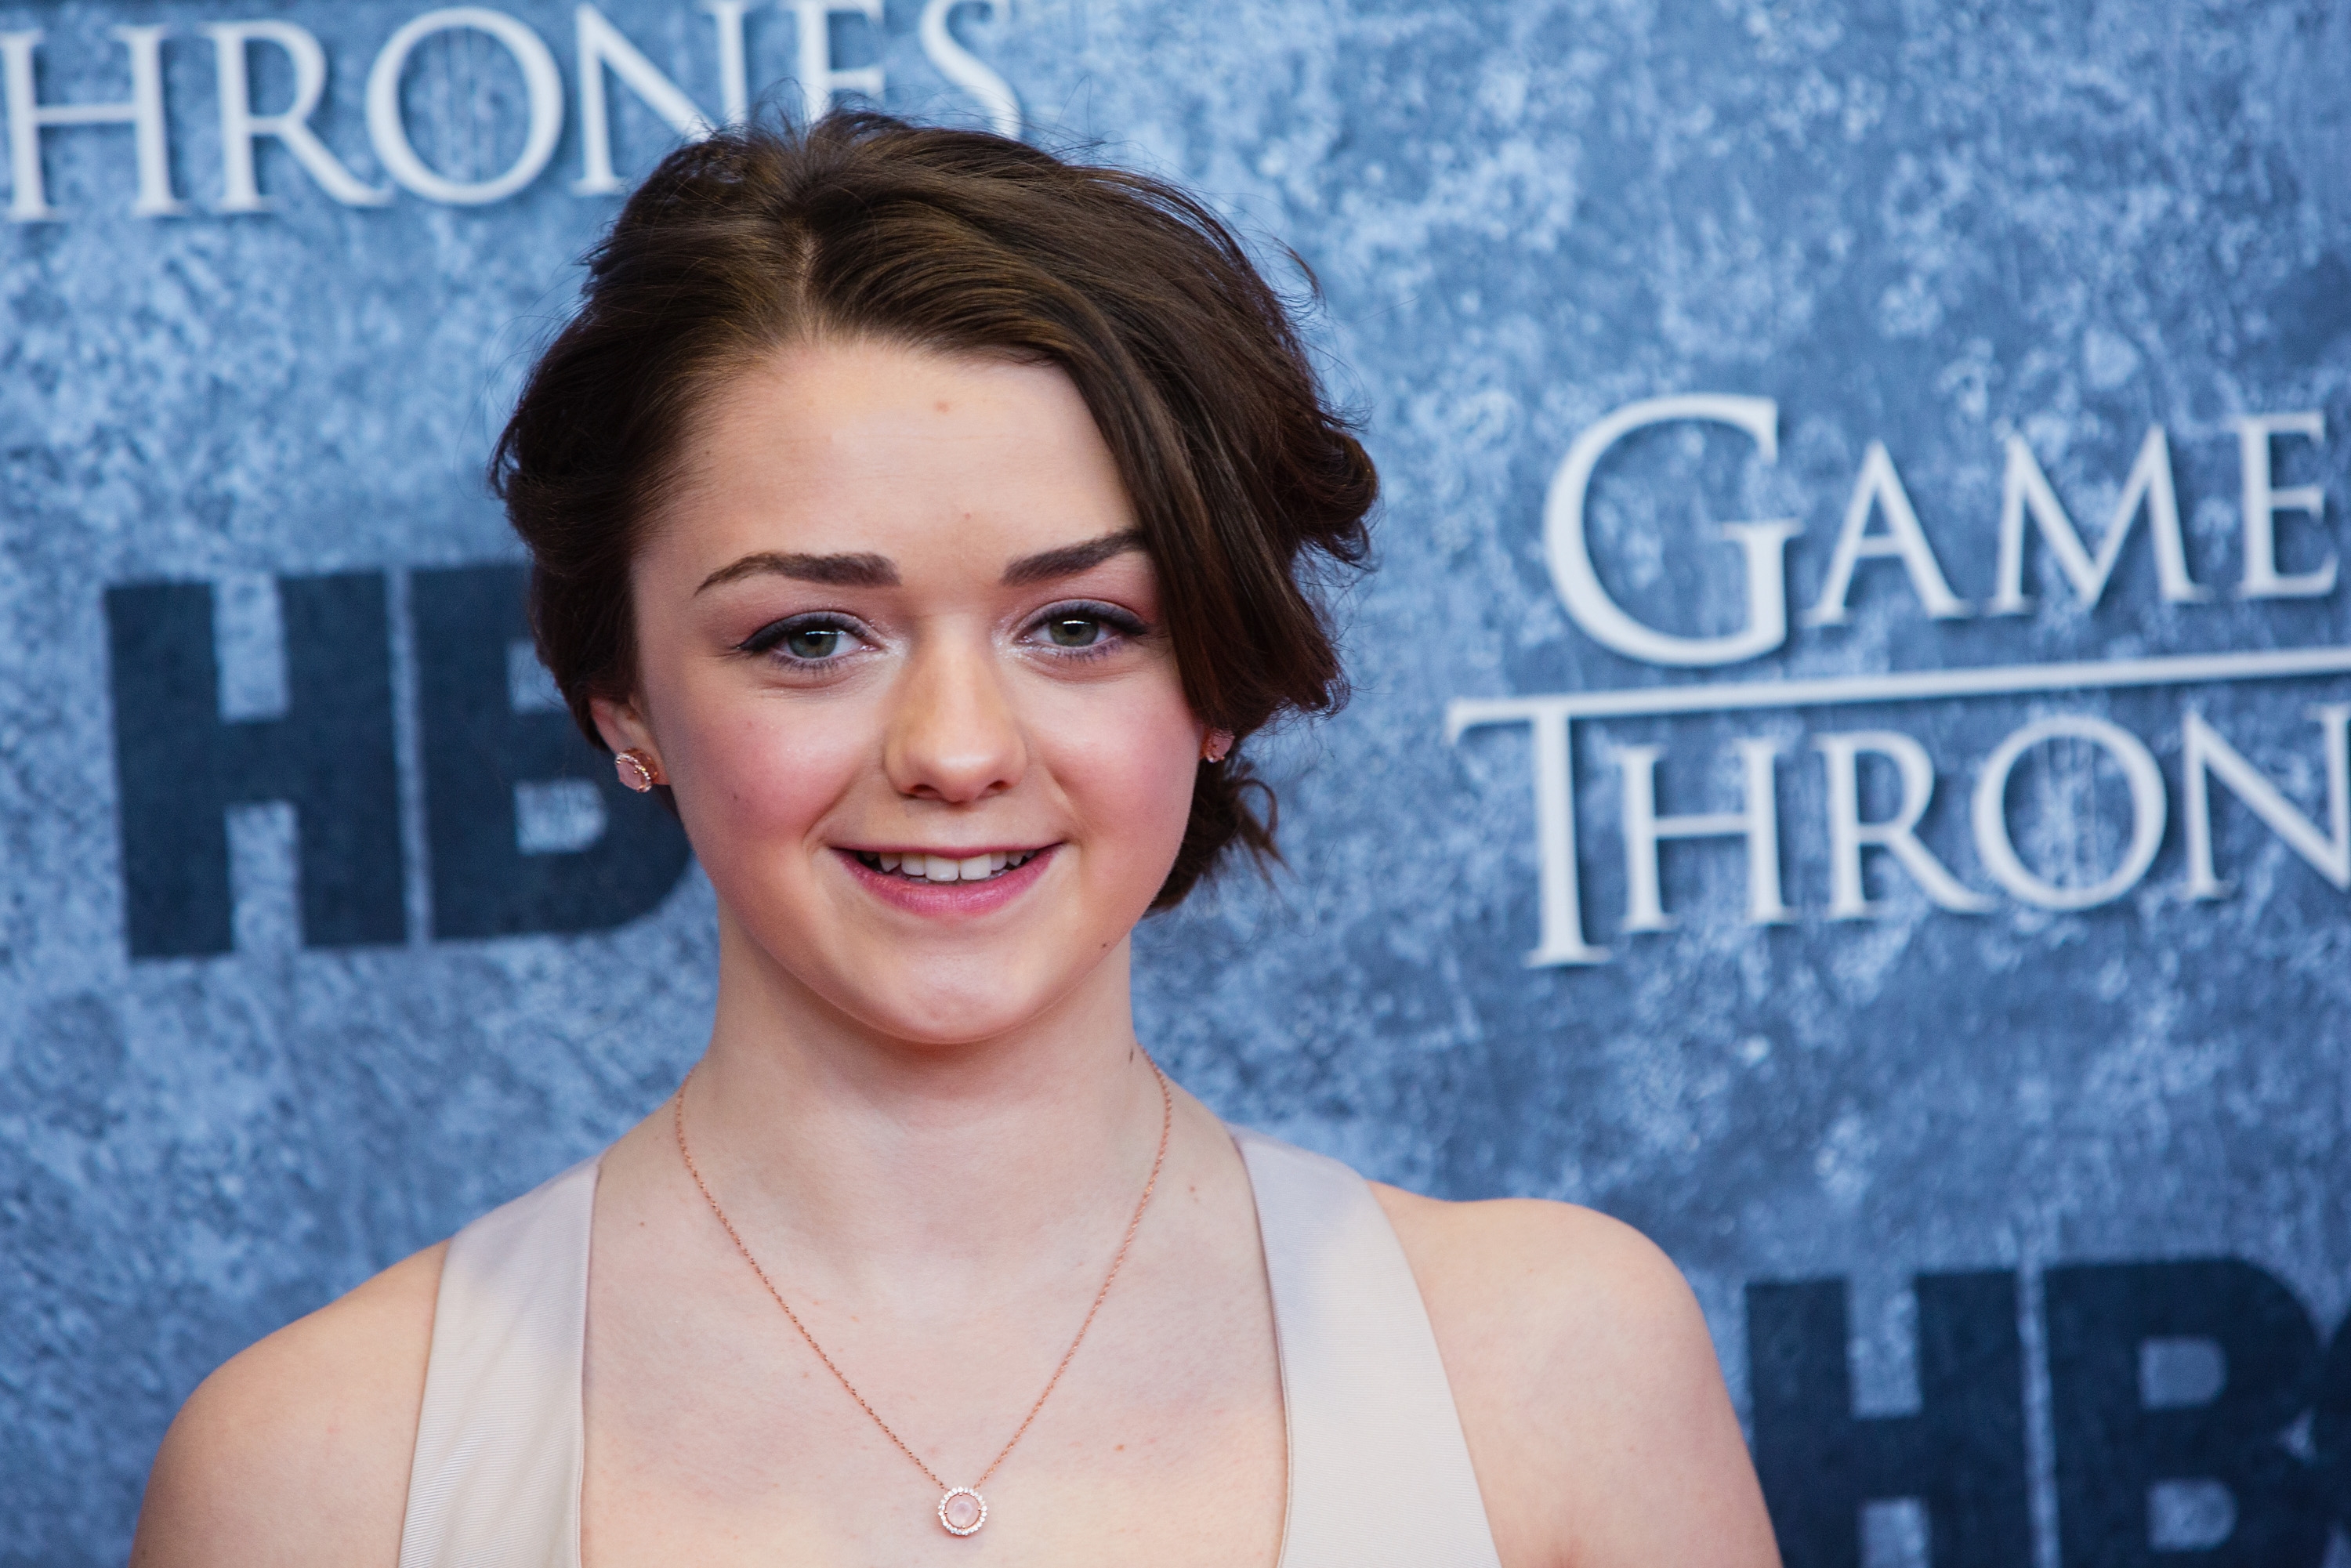 https://maisiewilliams.org/gallery/albums/Public Apperances/2013/March 21st-Game of Thrones Season 3 Seattle Premiere/0009.jpg